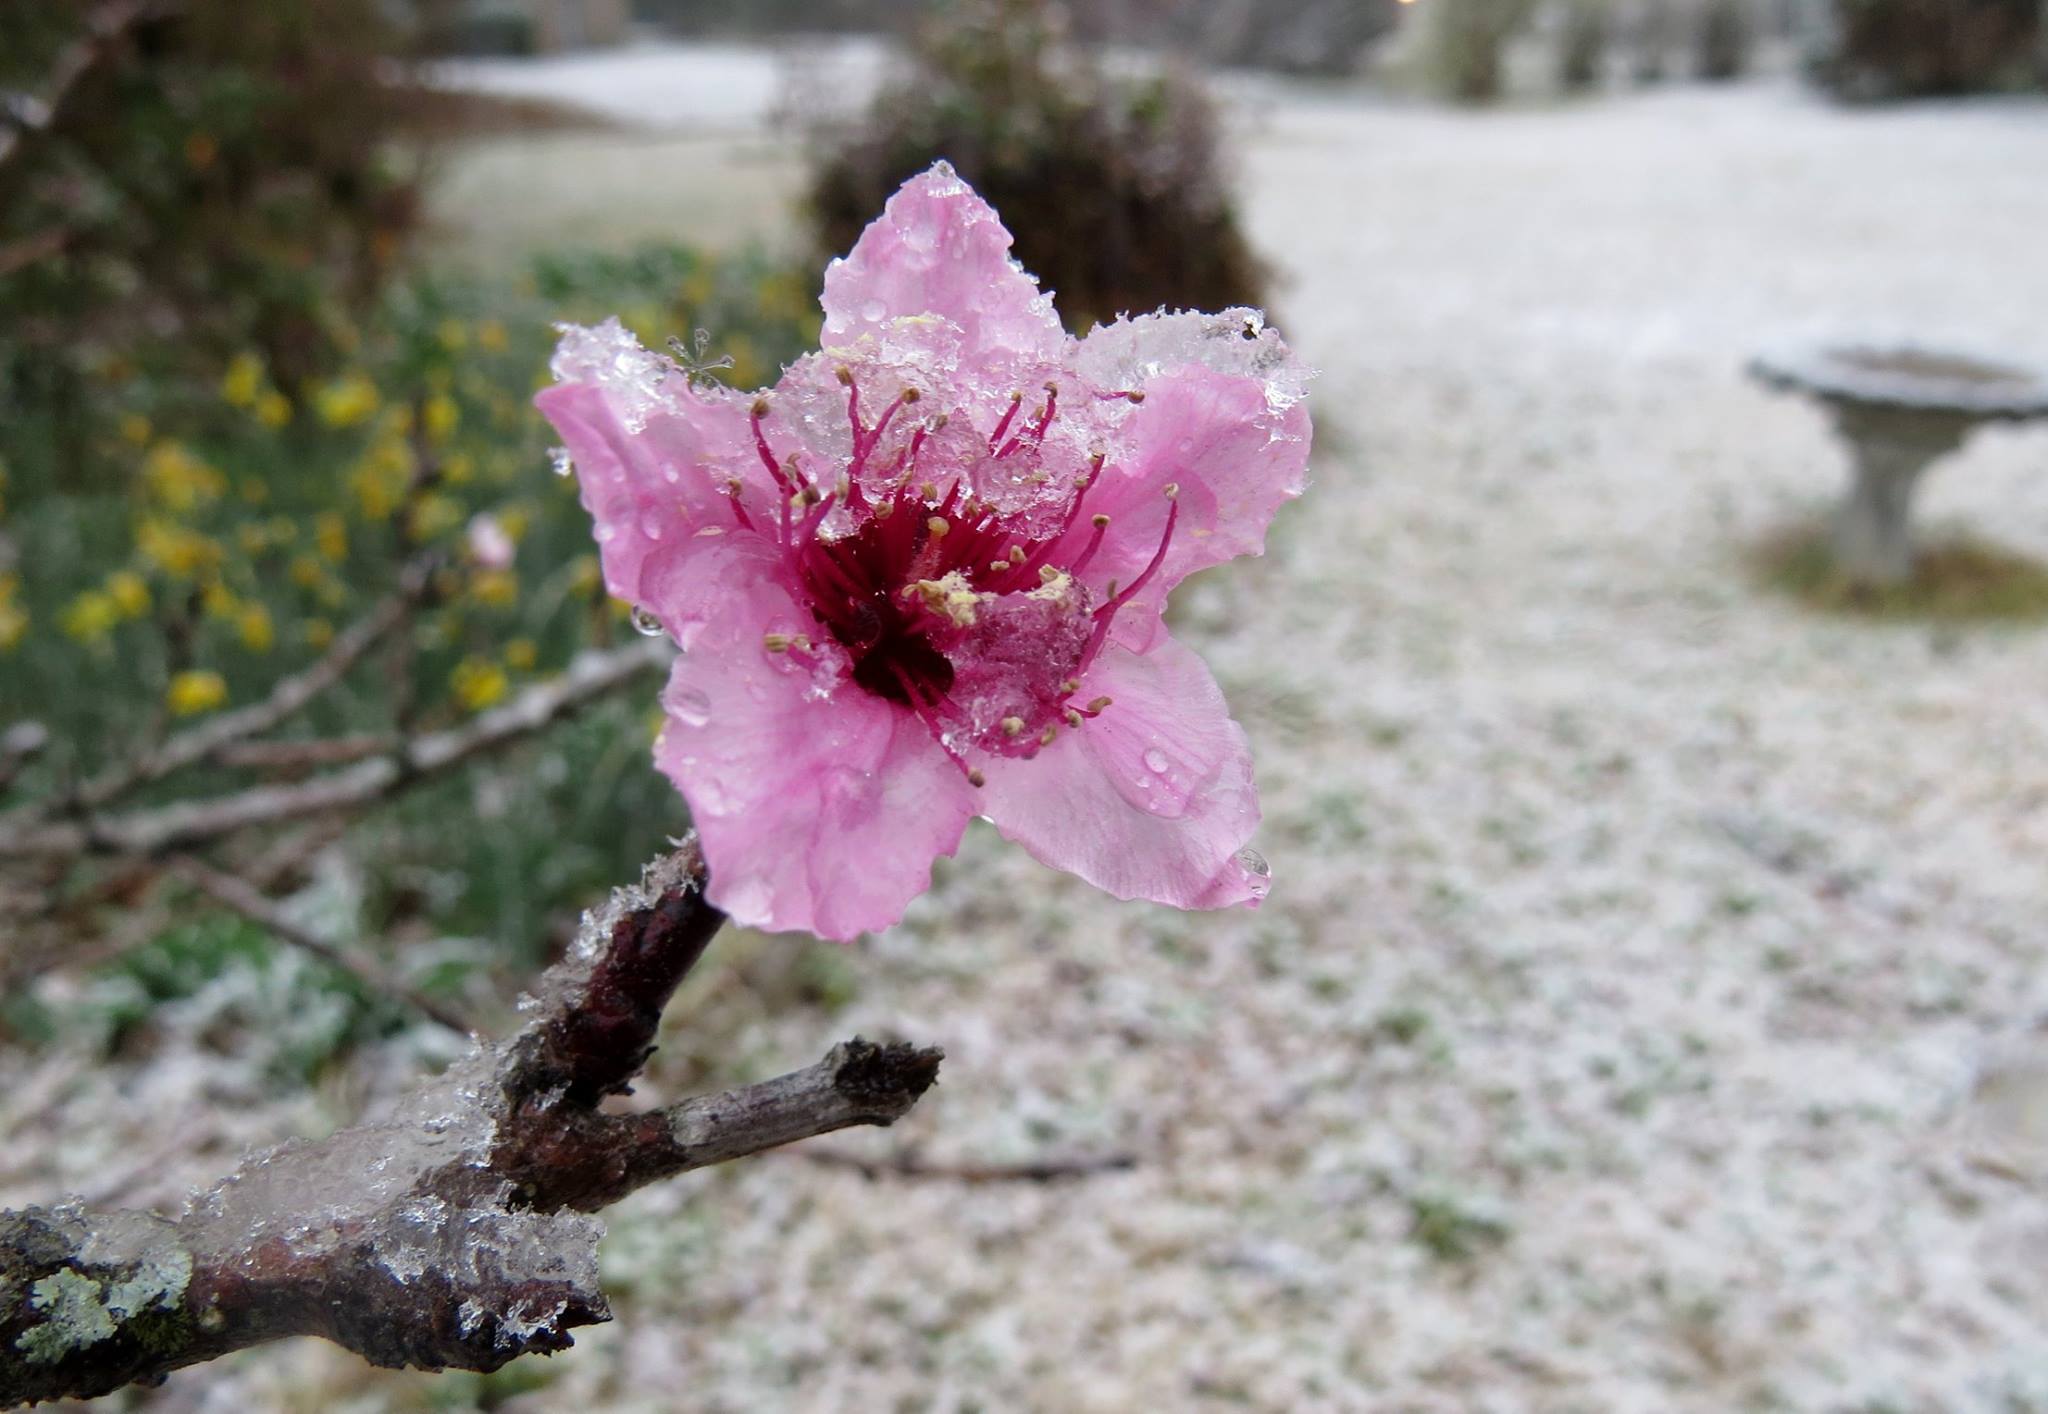 Very warm weather in January and February meant many trees and bushes were blooming two weeks or more earlier than normal.  This peach tree was damaged by a hard freeze just a few nights after this picture was taken.